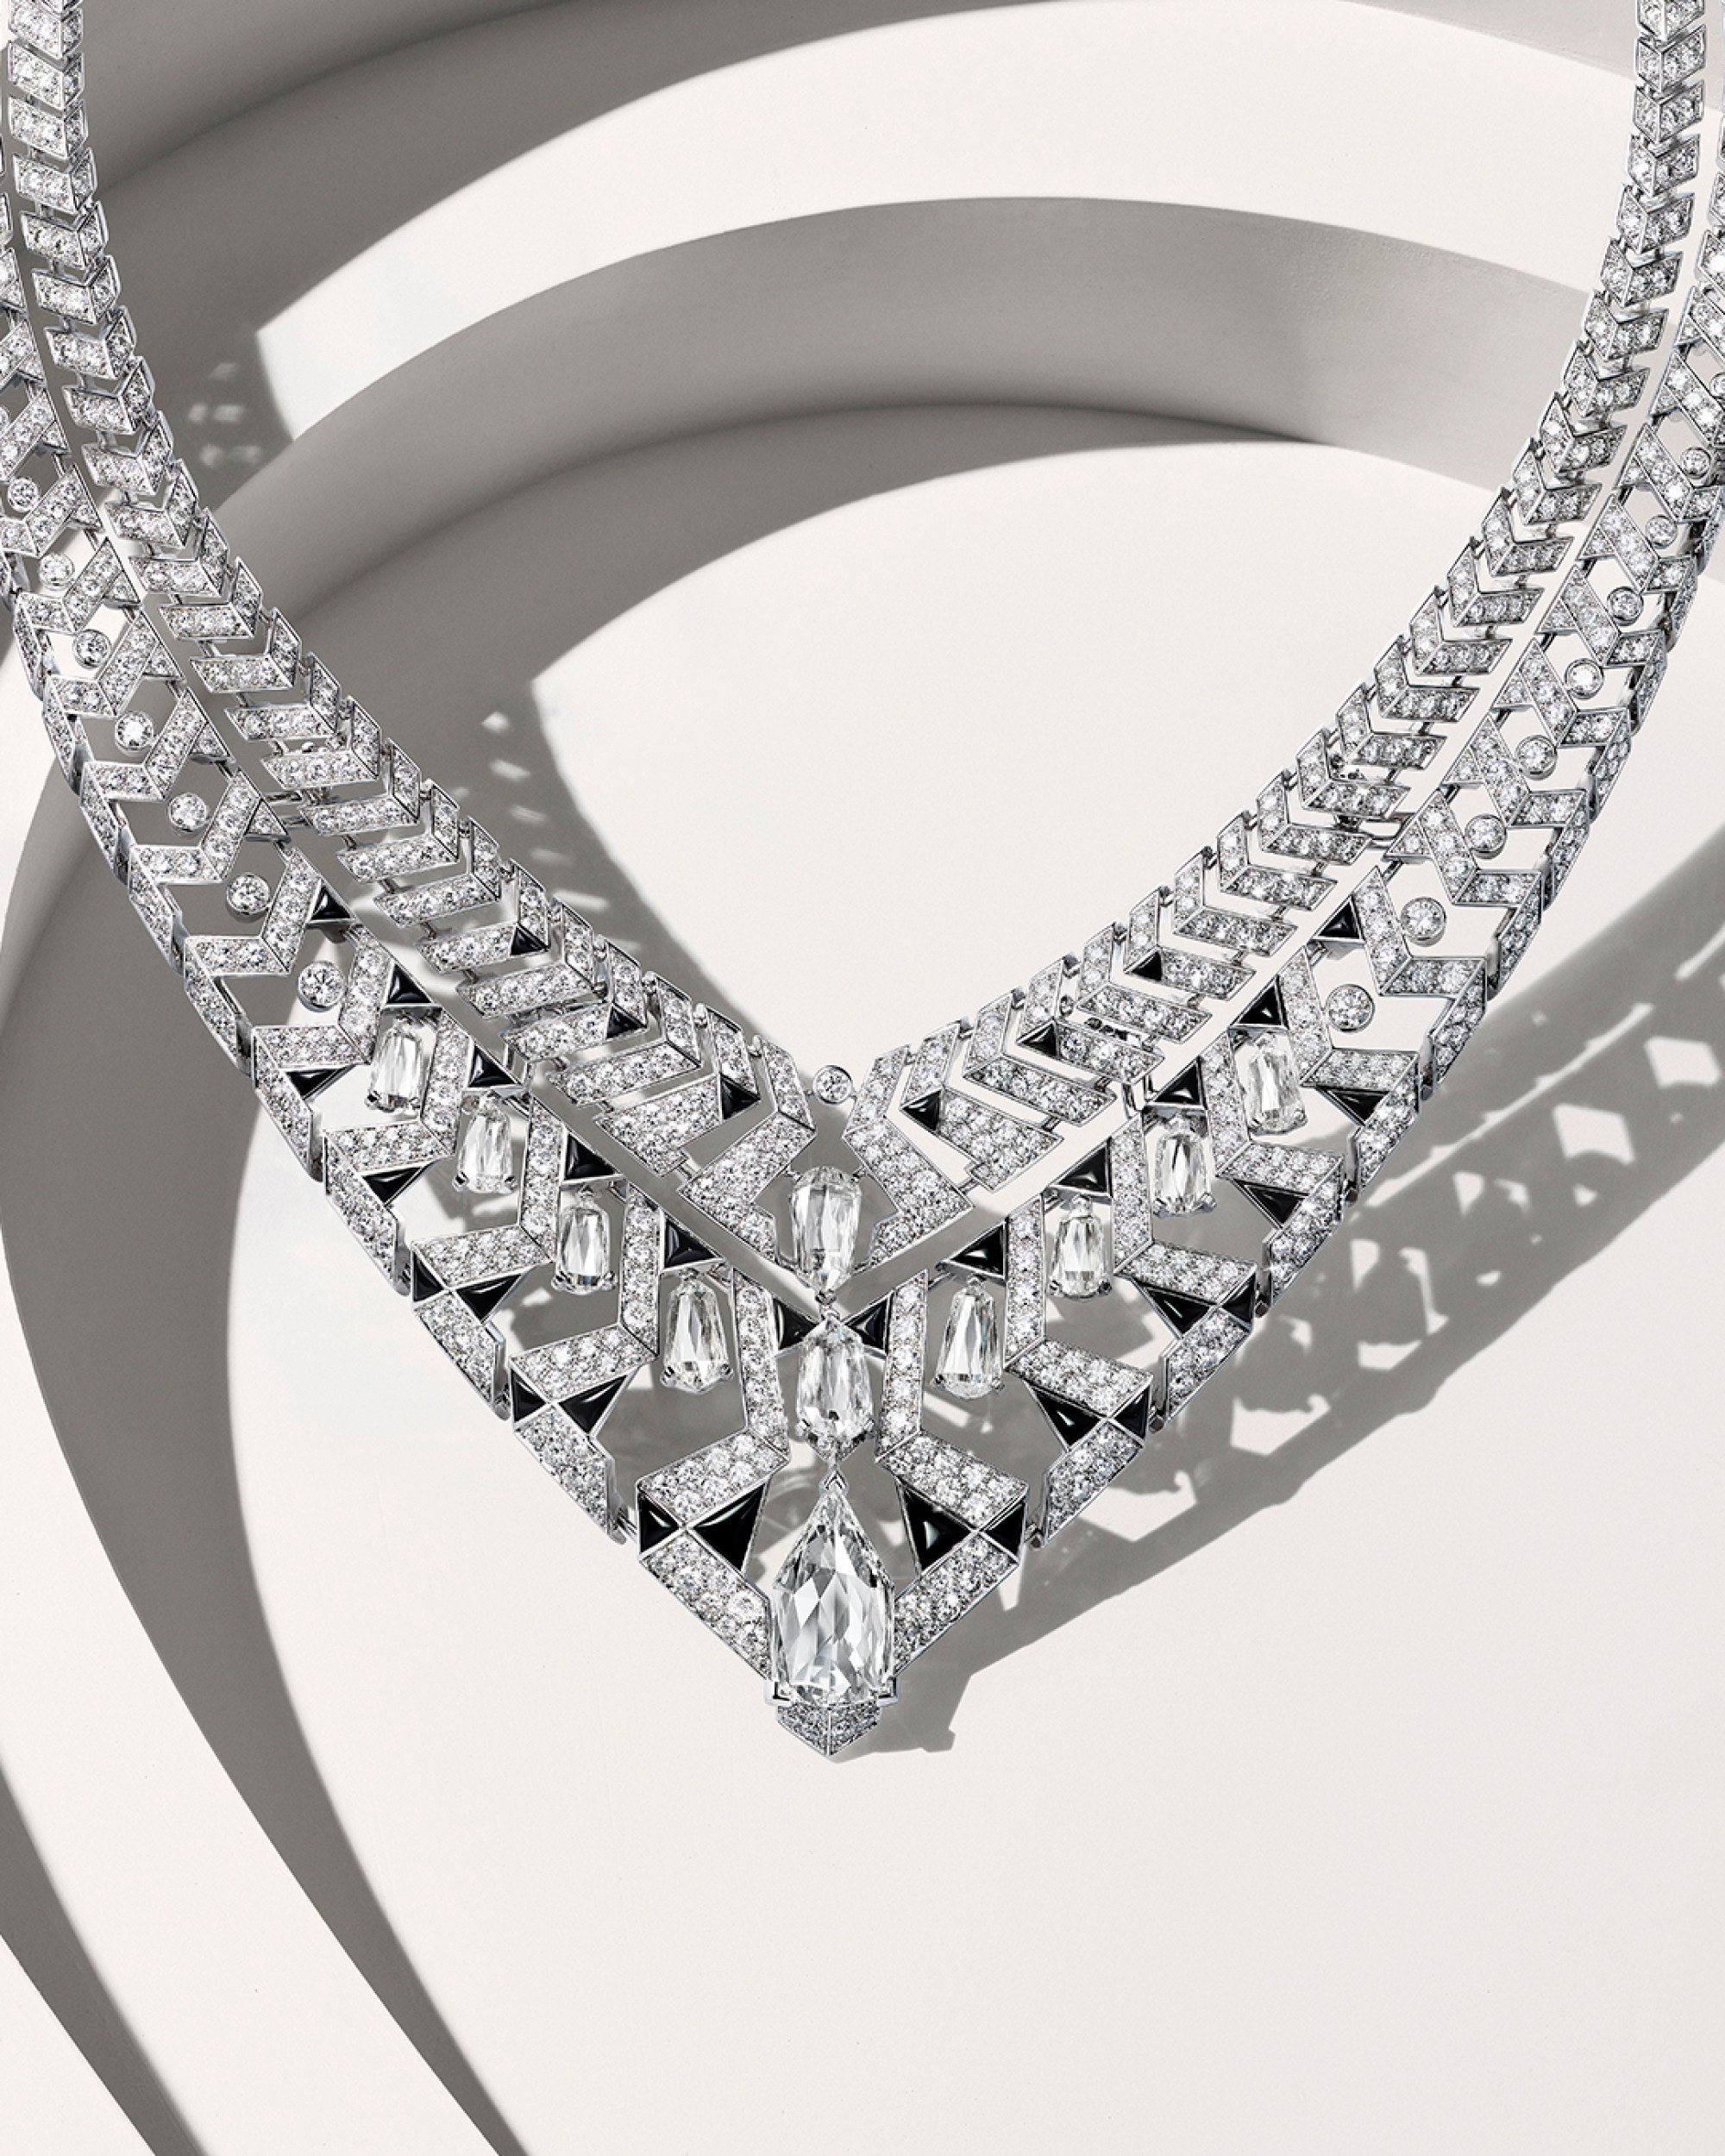 LOUIS VUITTON UNVEILS ITS NEWEST HIGH JEWELRY COLLECTION “DEEP